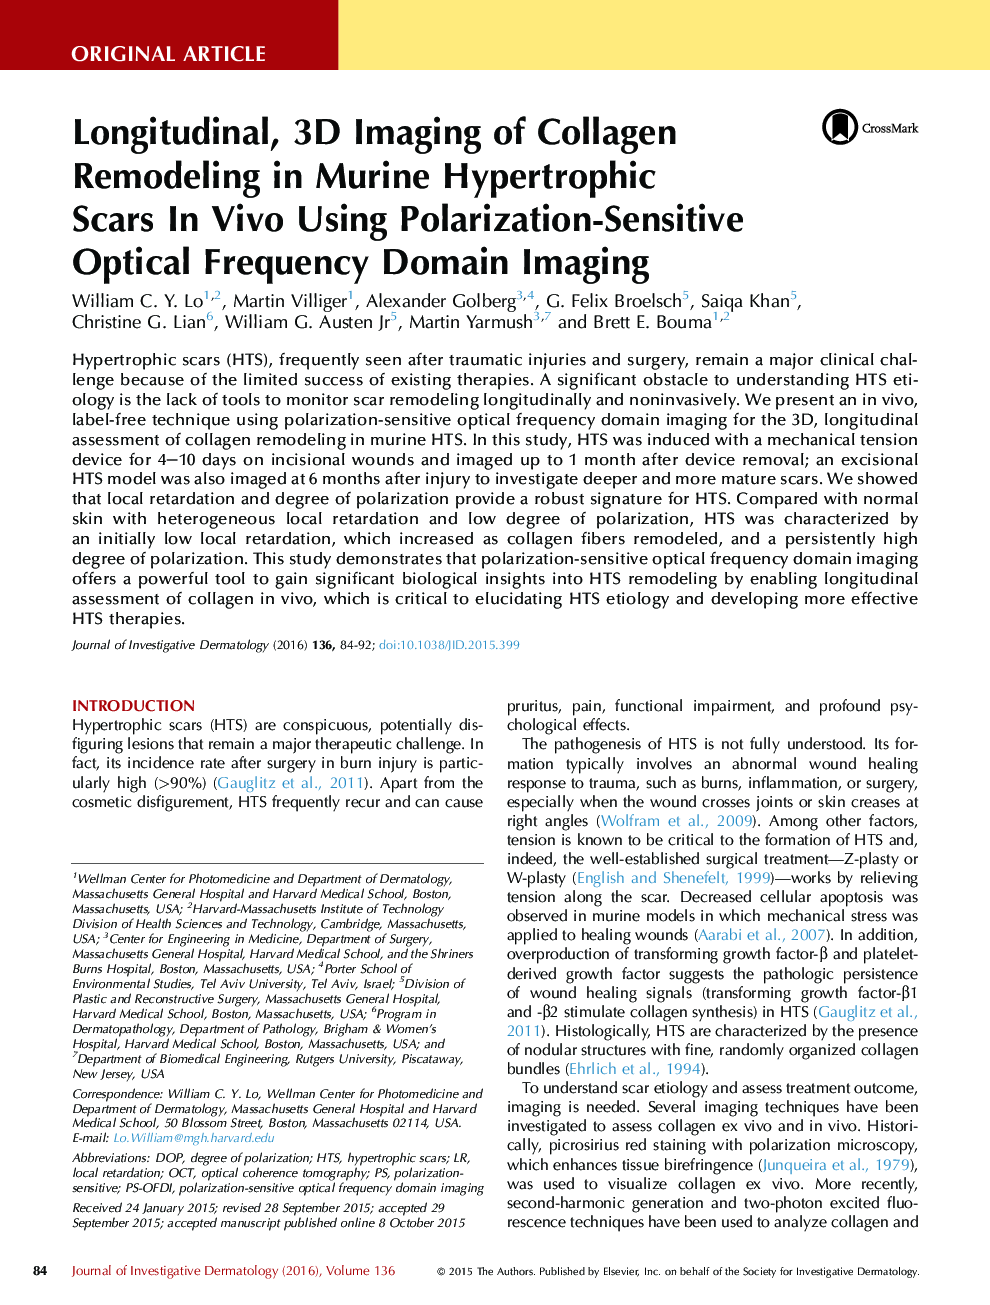 Original ArticleConnective TissueLongitudinal, 3D Imaging ofÂ Collagen Remodeling in MurineÂ Hypertrophic ScarsÂ In Vivo Using Polarization-Sensitive Optical Frequency Domain Imaging